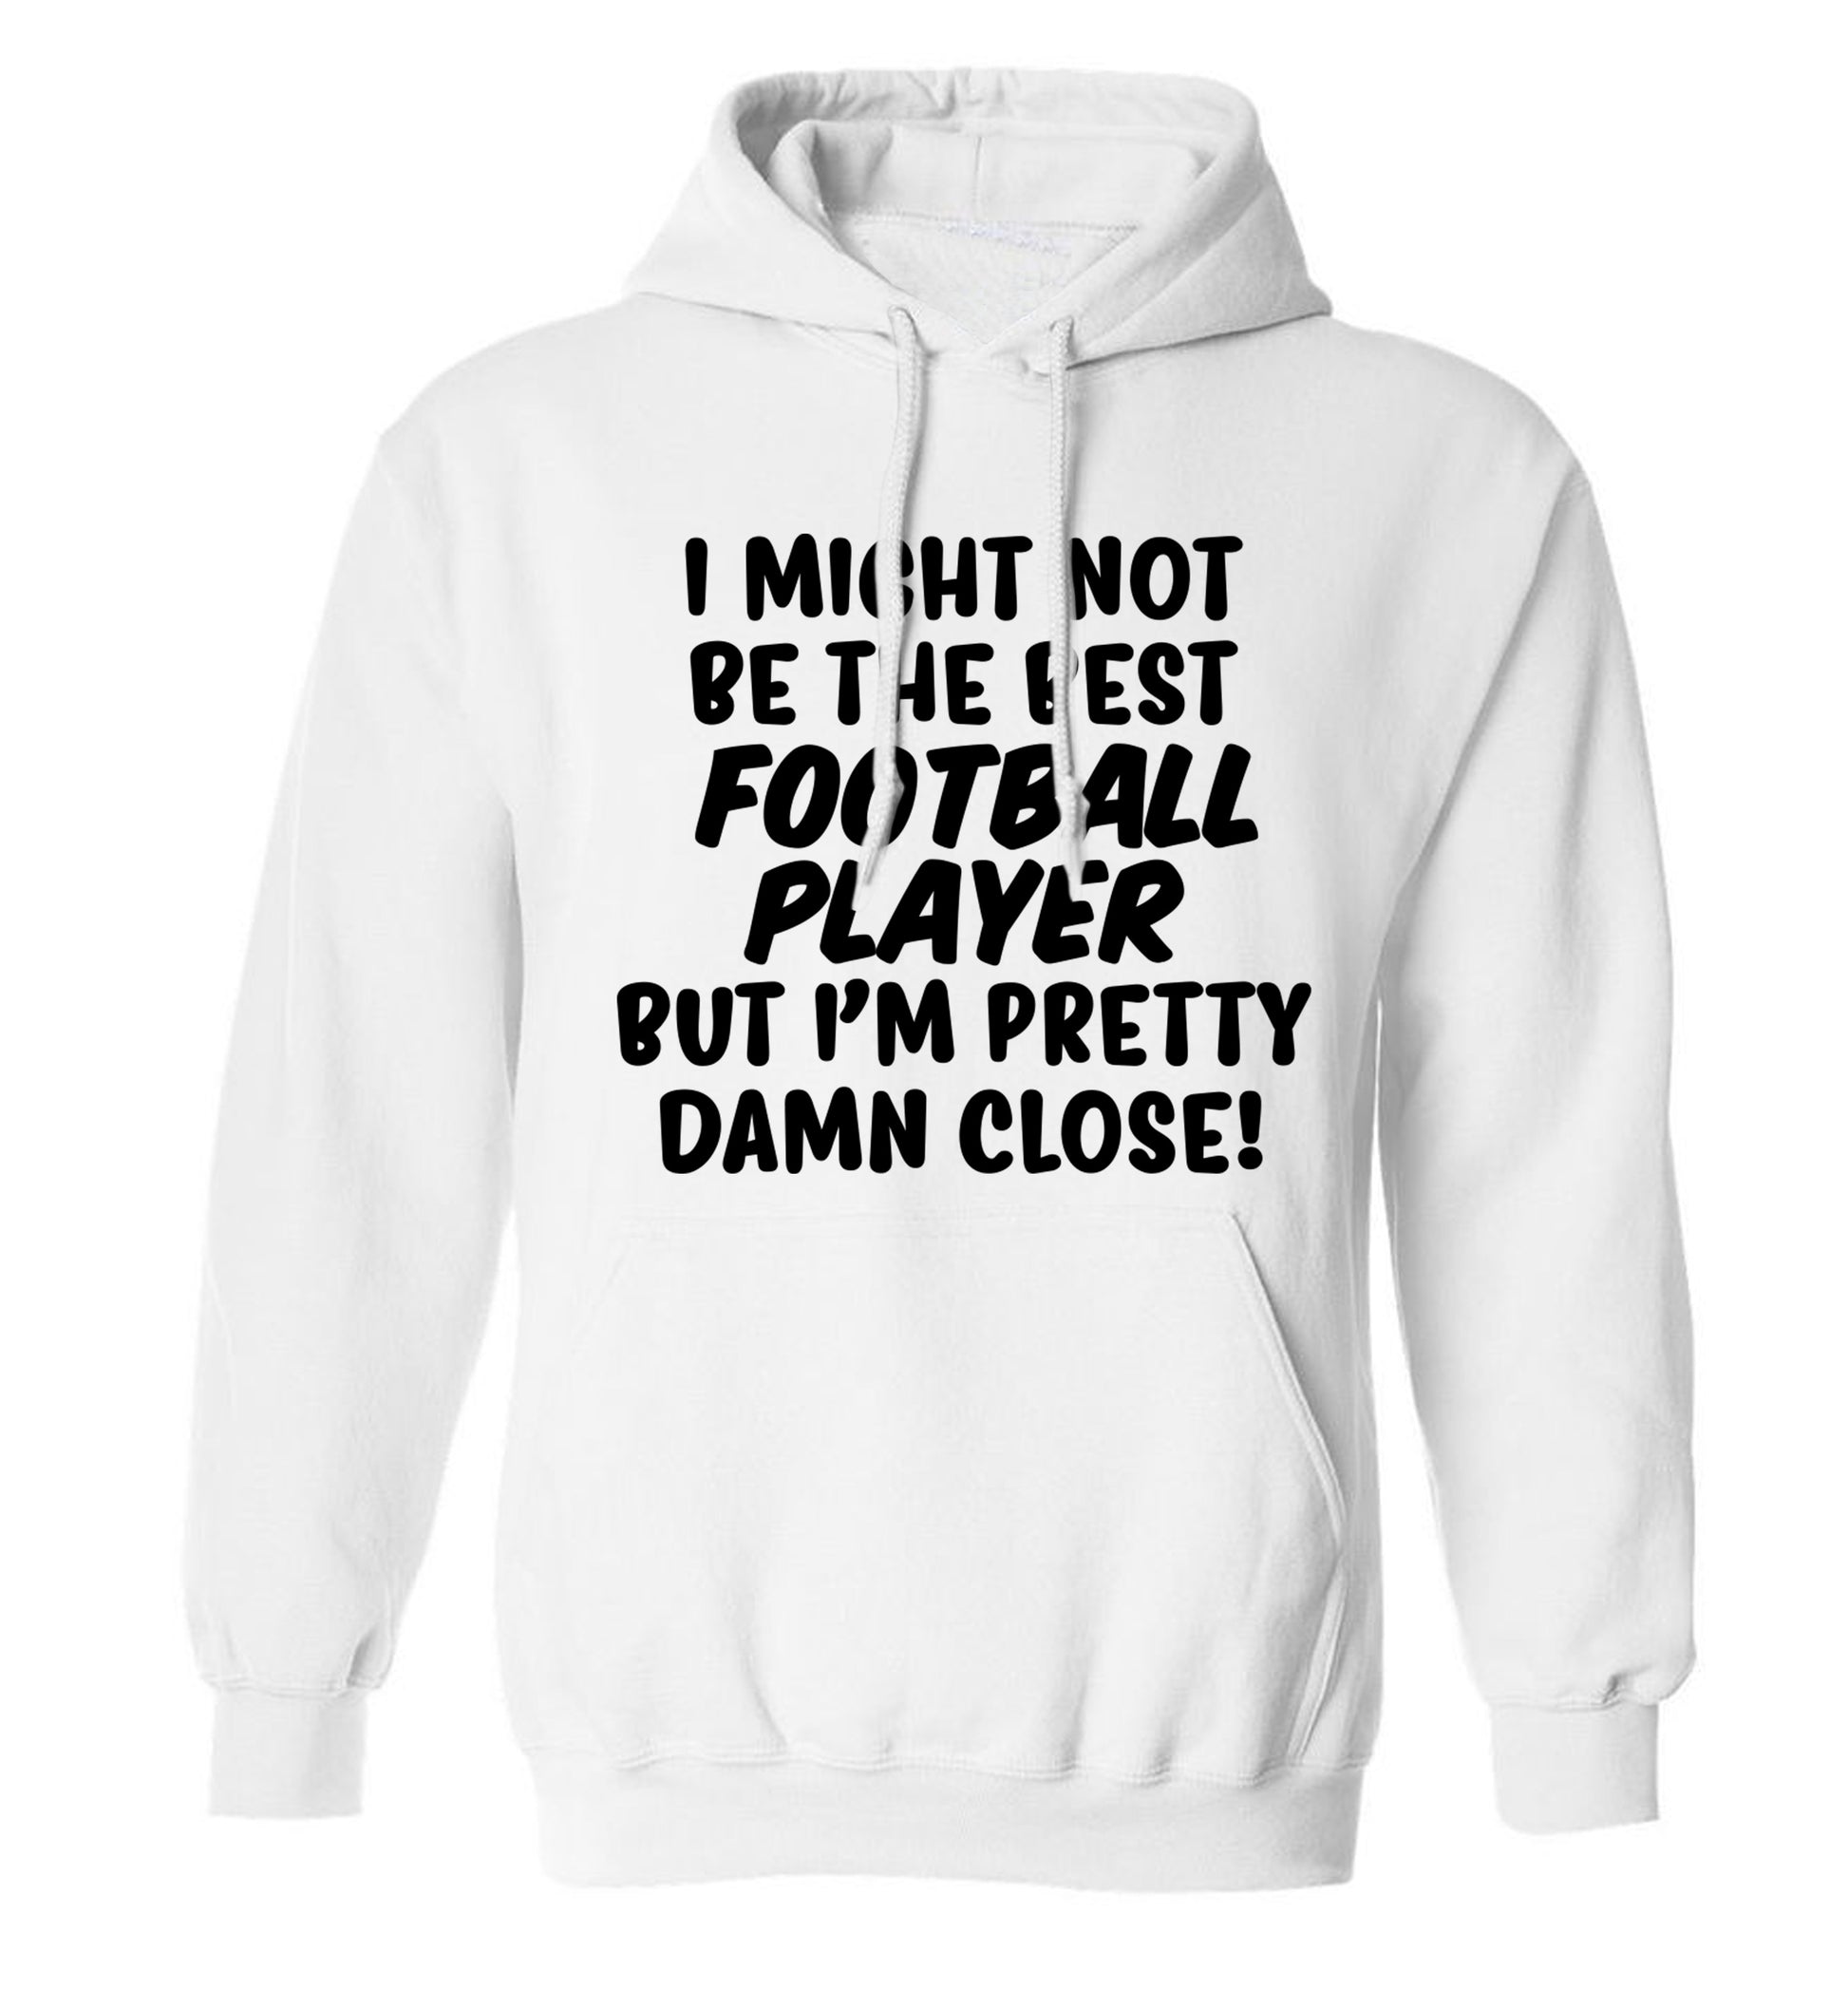 I might not be the best football player but I'm pretty close! adults unisexwhite hoodie 2XL